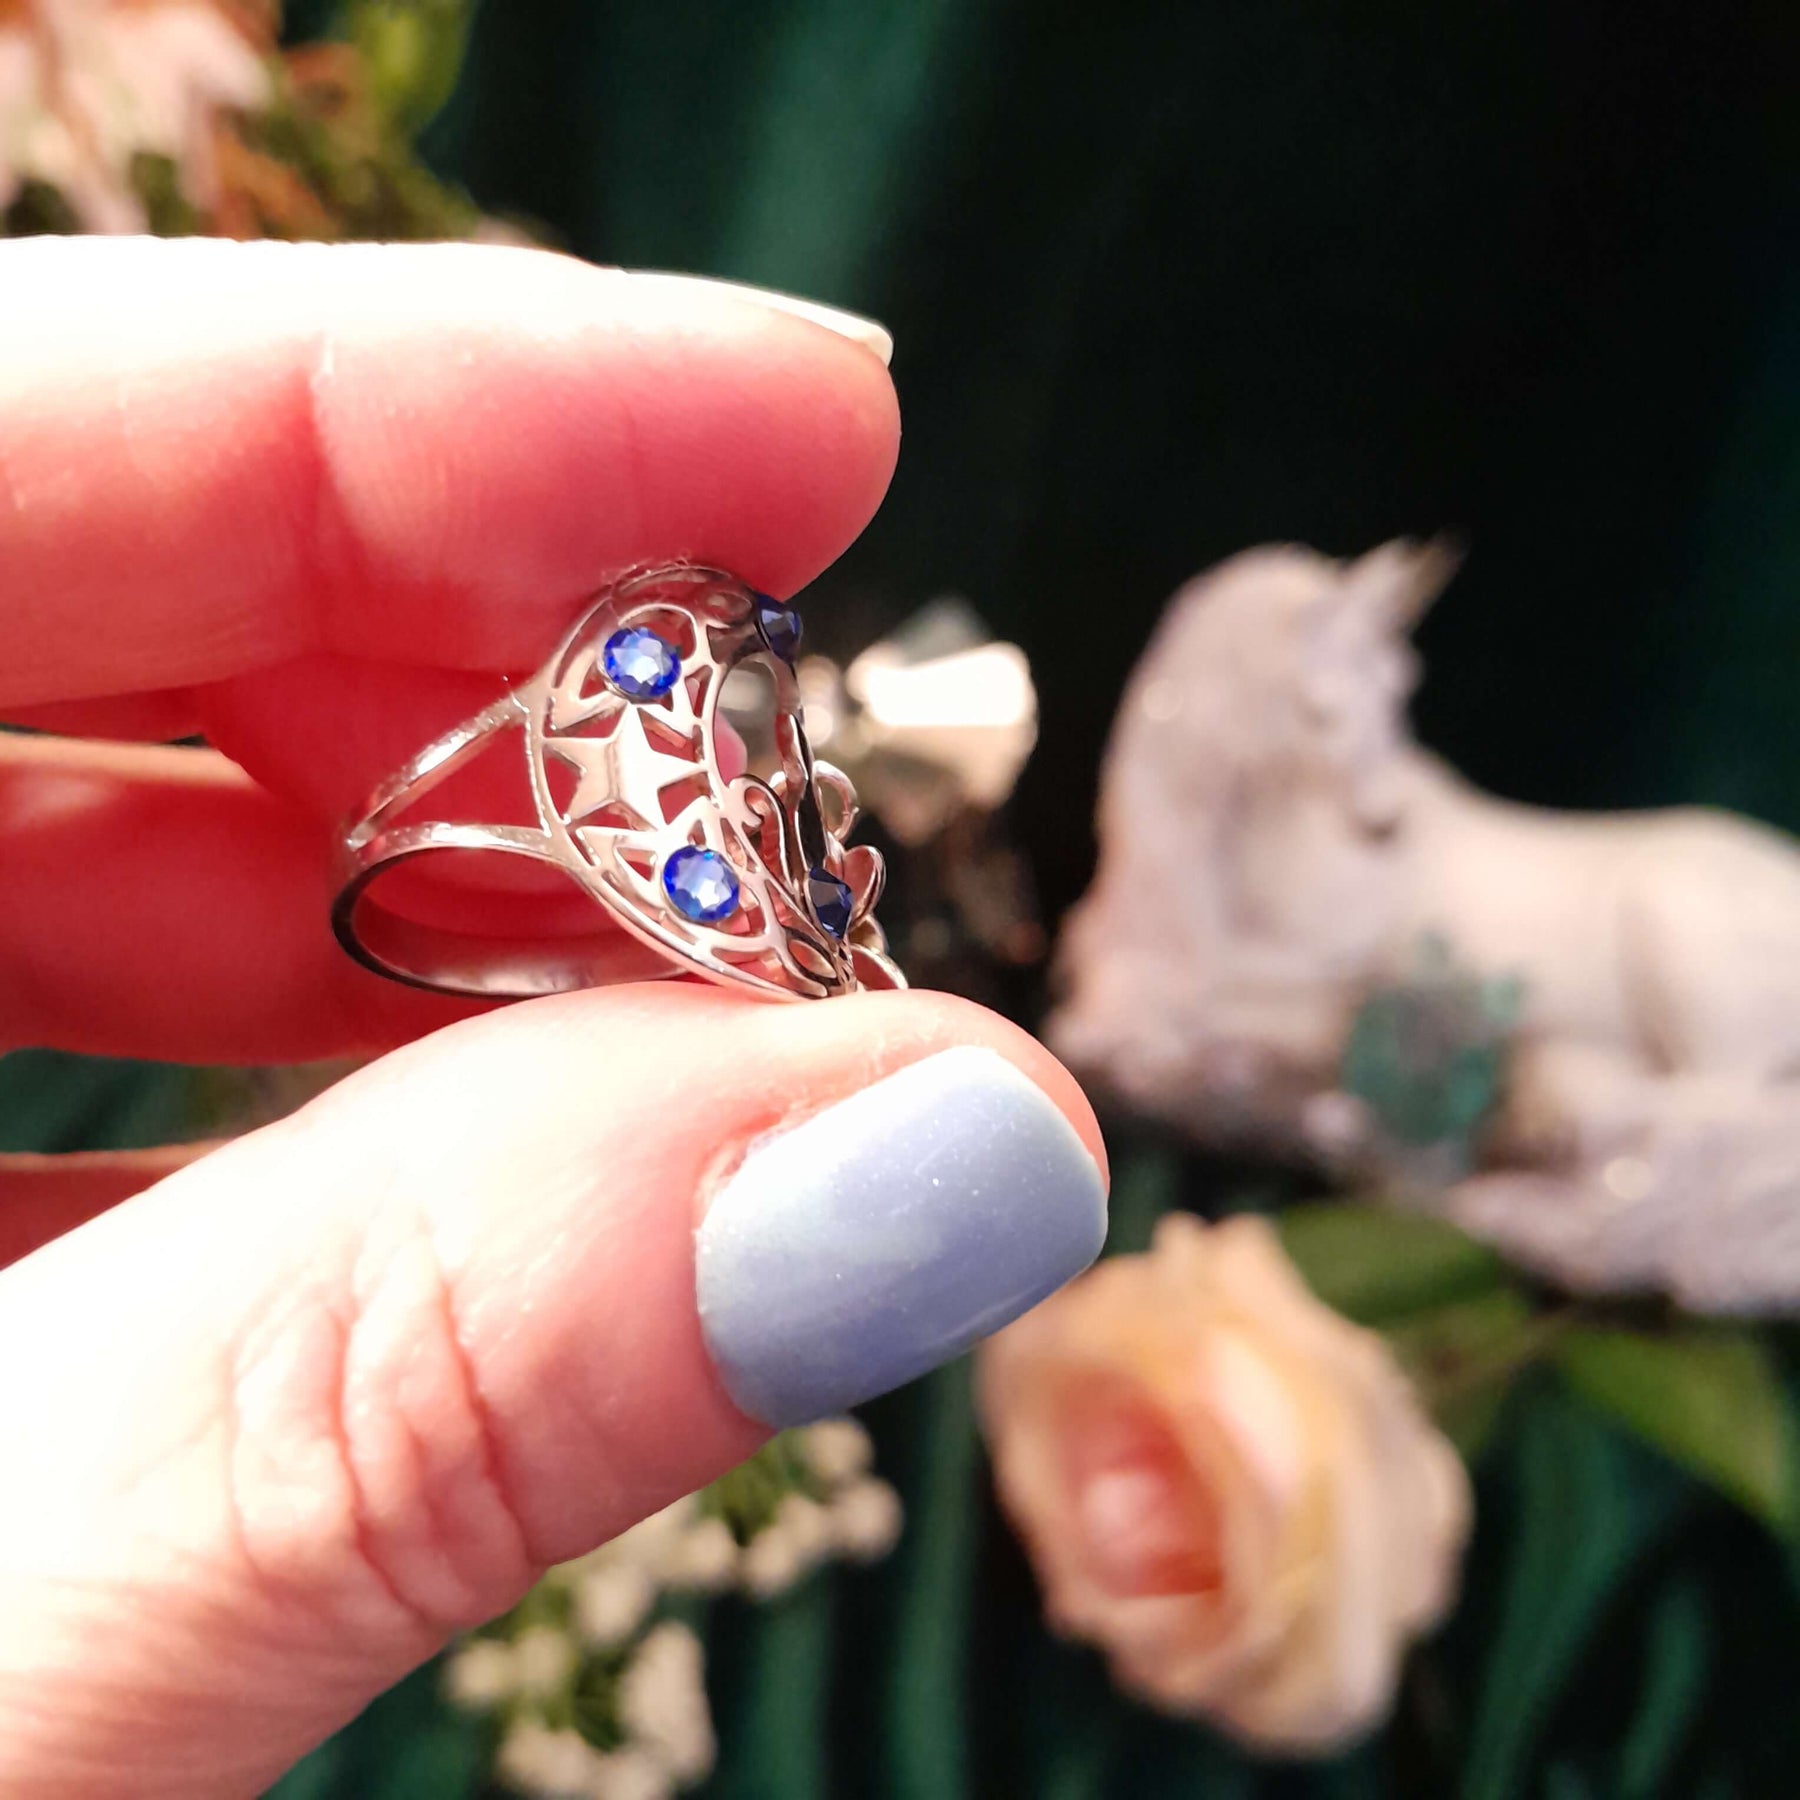 Cat Moon Fairy Blue Crystal Ring Size 9